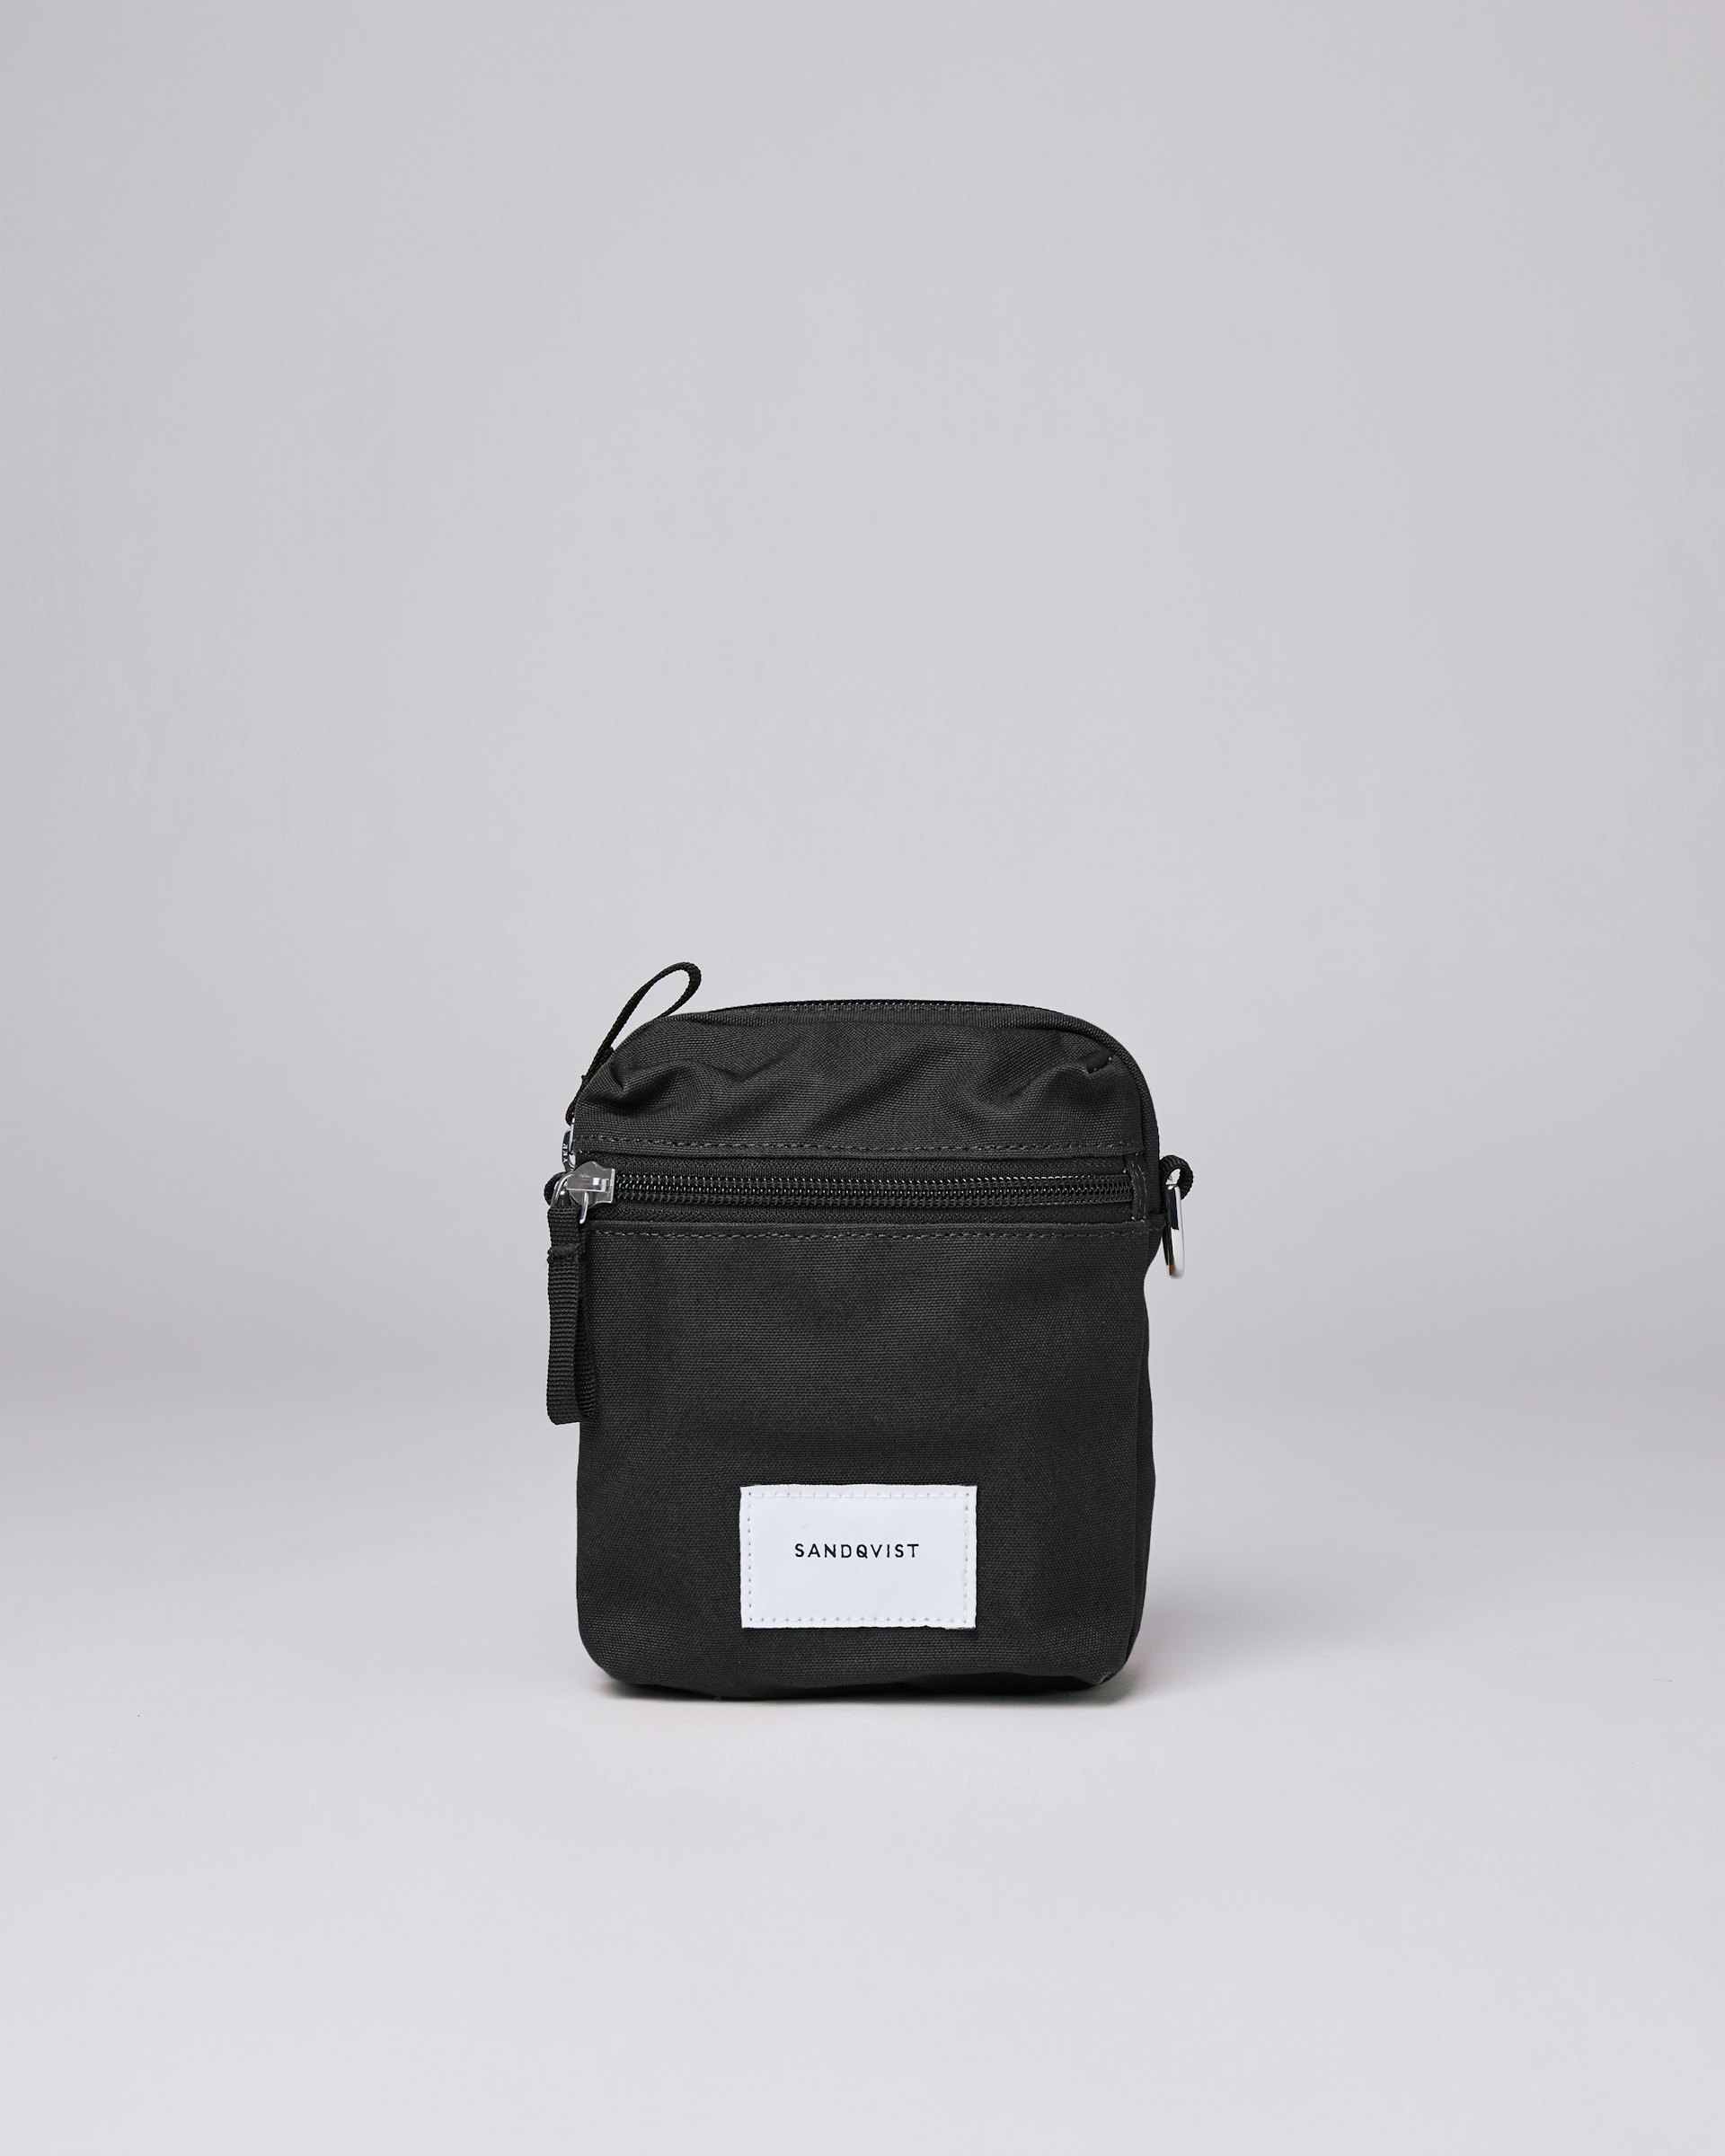 Sixten Vegan Black belongs to the category Sacs bandoulières and is in color black